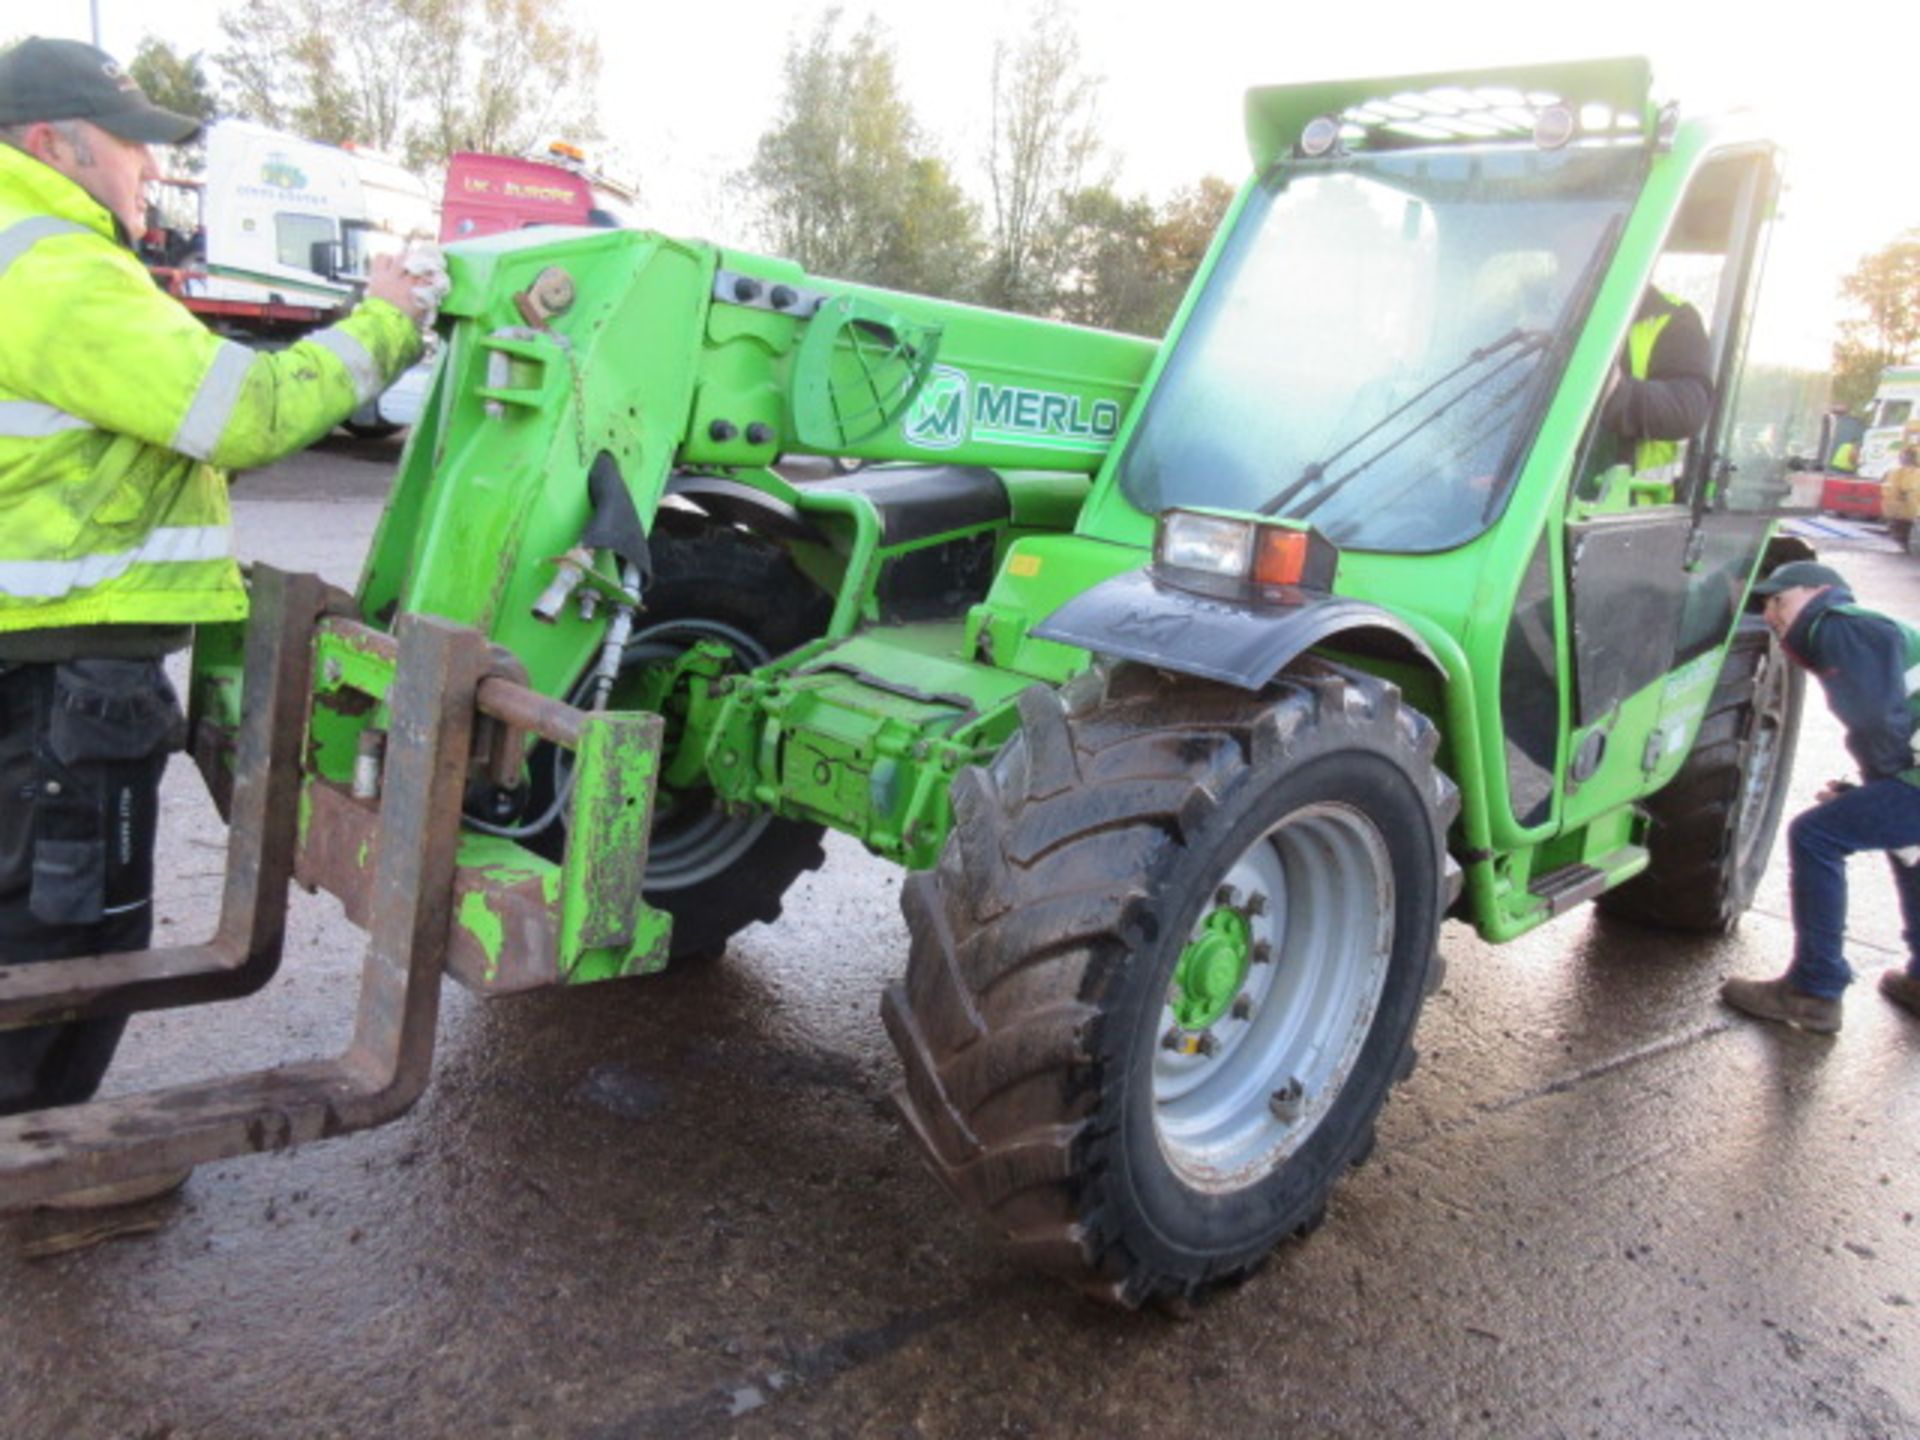 2010 Merlo Panoramic P32.6 Plus Telehandler. Pallet Forks & Pick Up Hitch. 7400 hrs